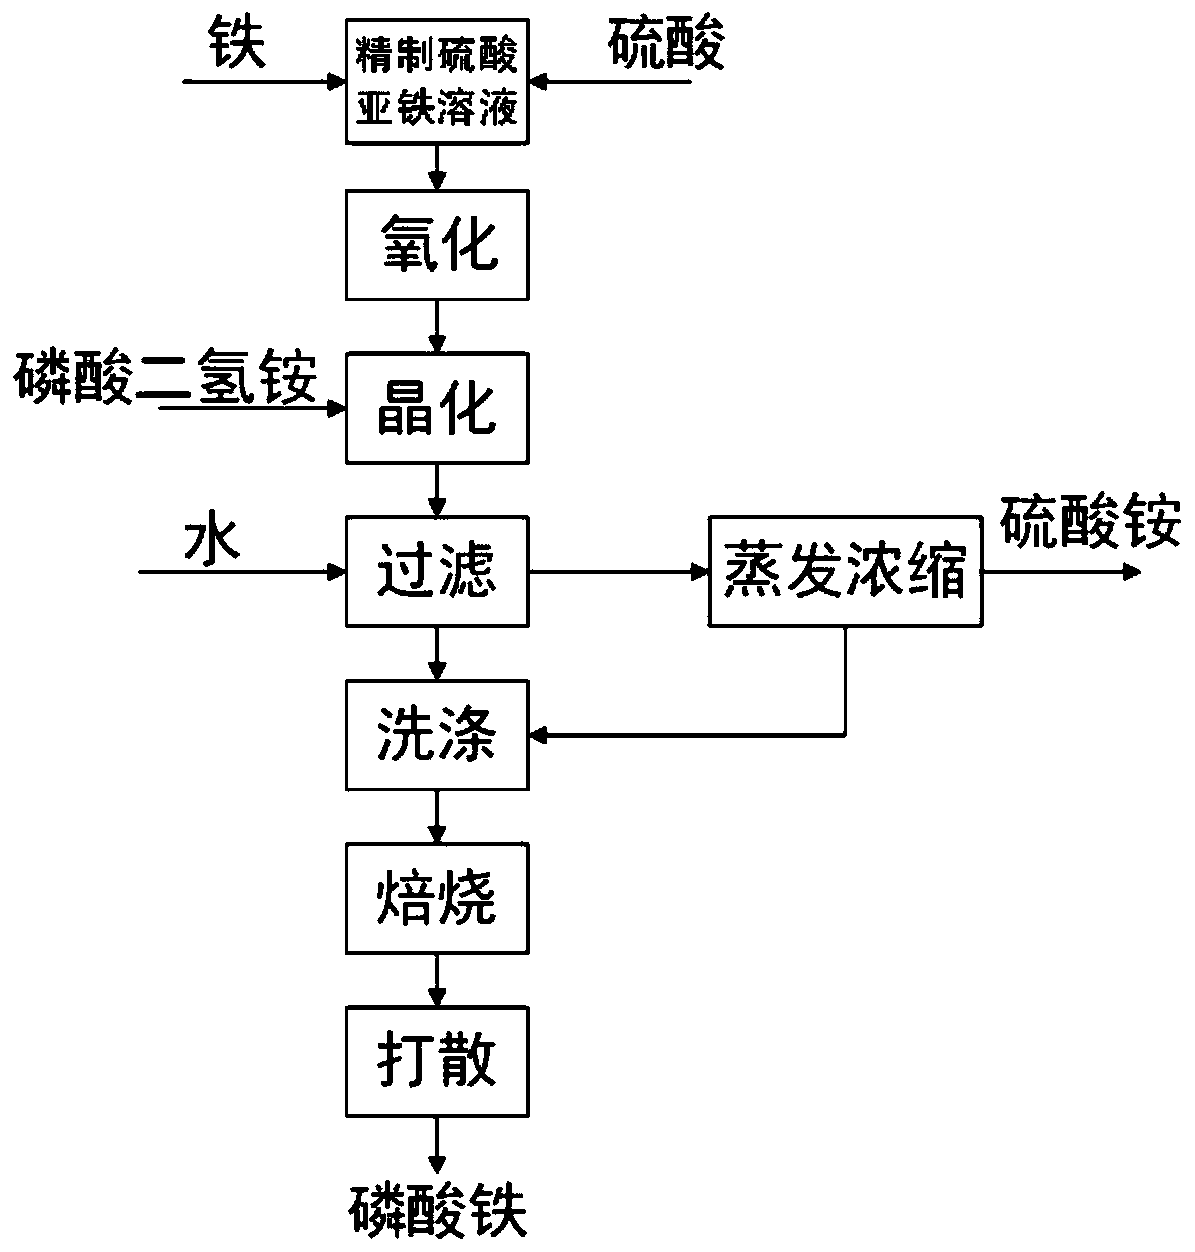 Preparation method of battery-grade anhydrous iron phosphate